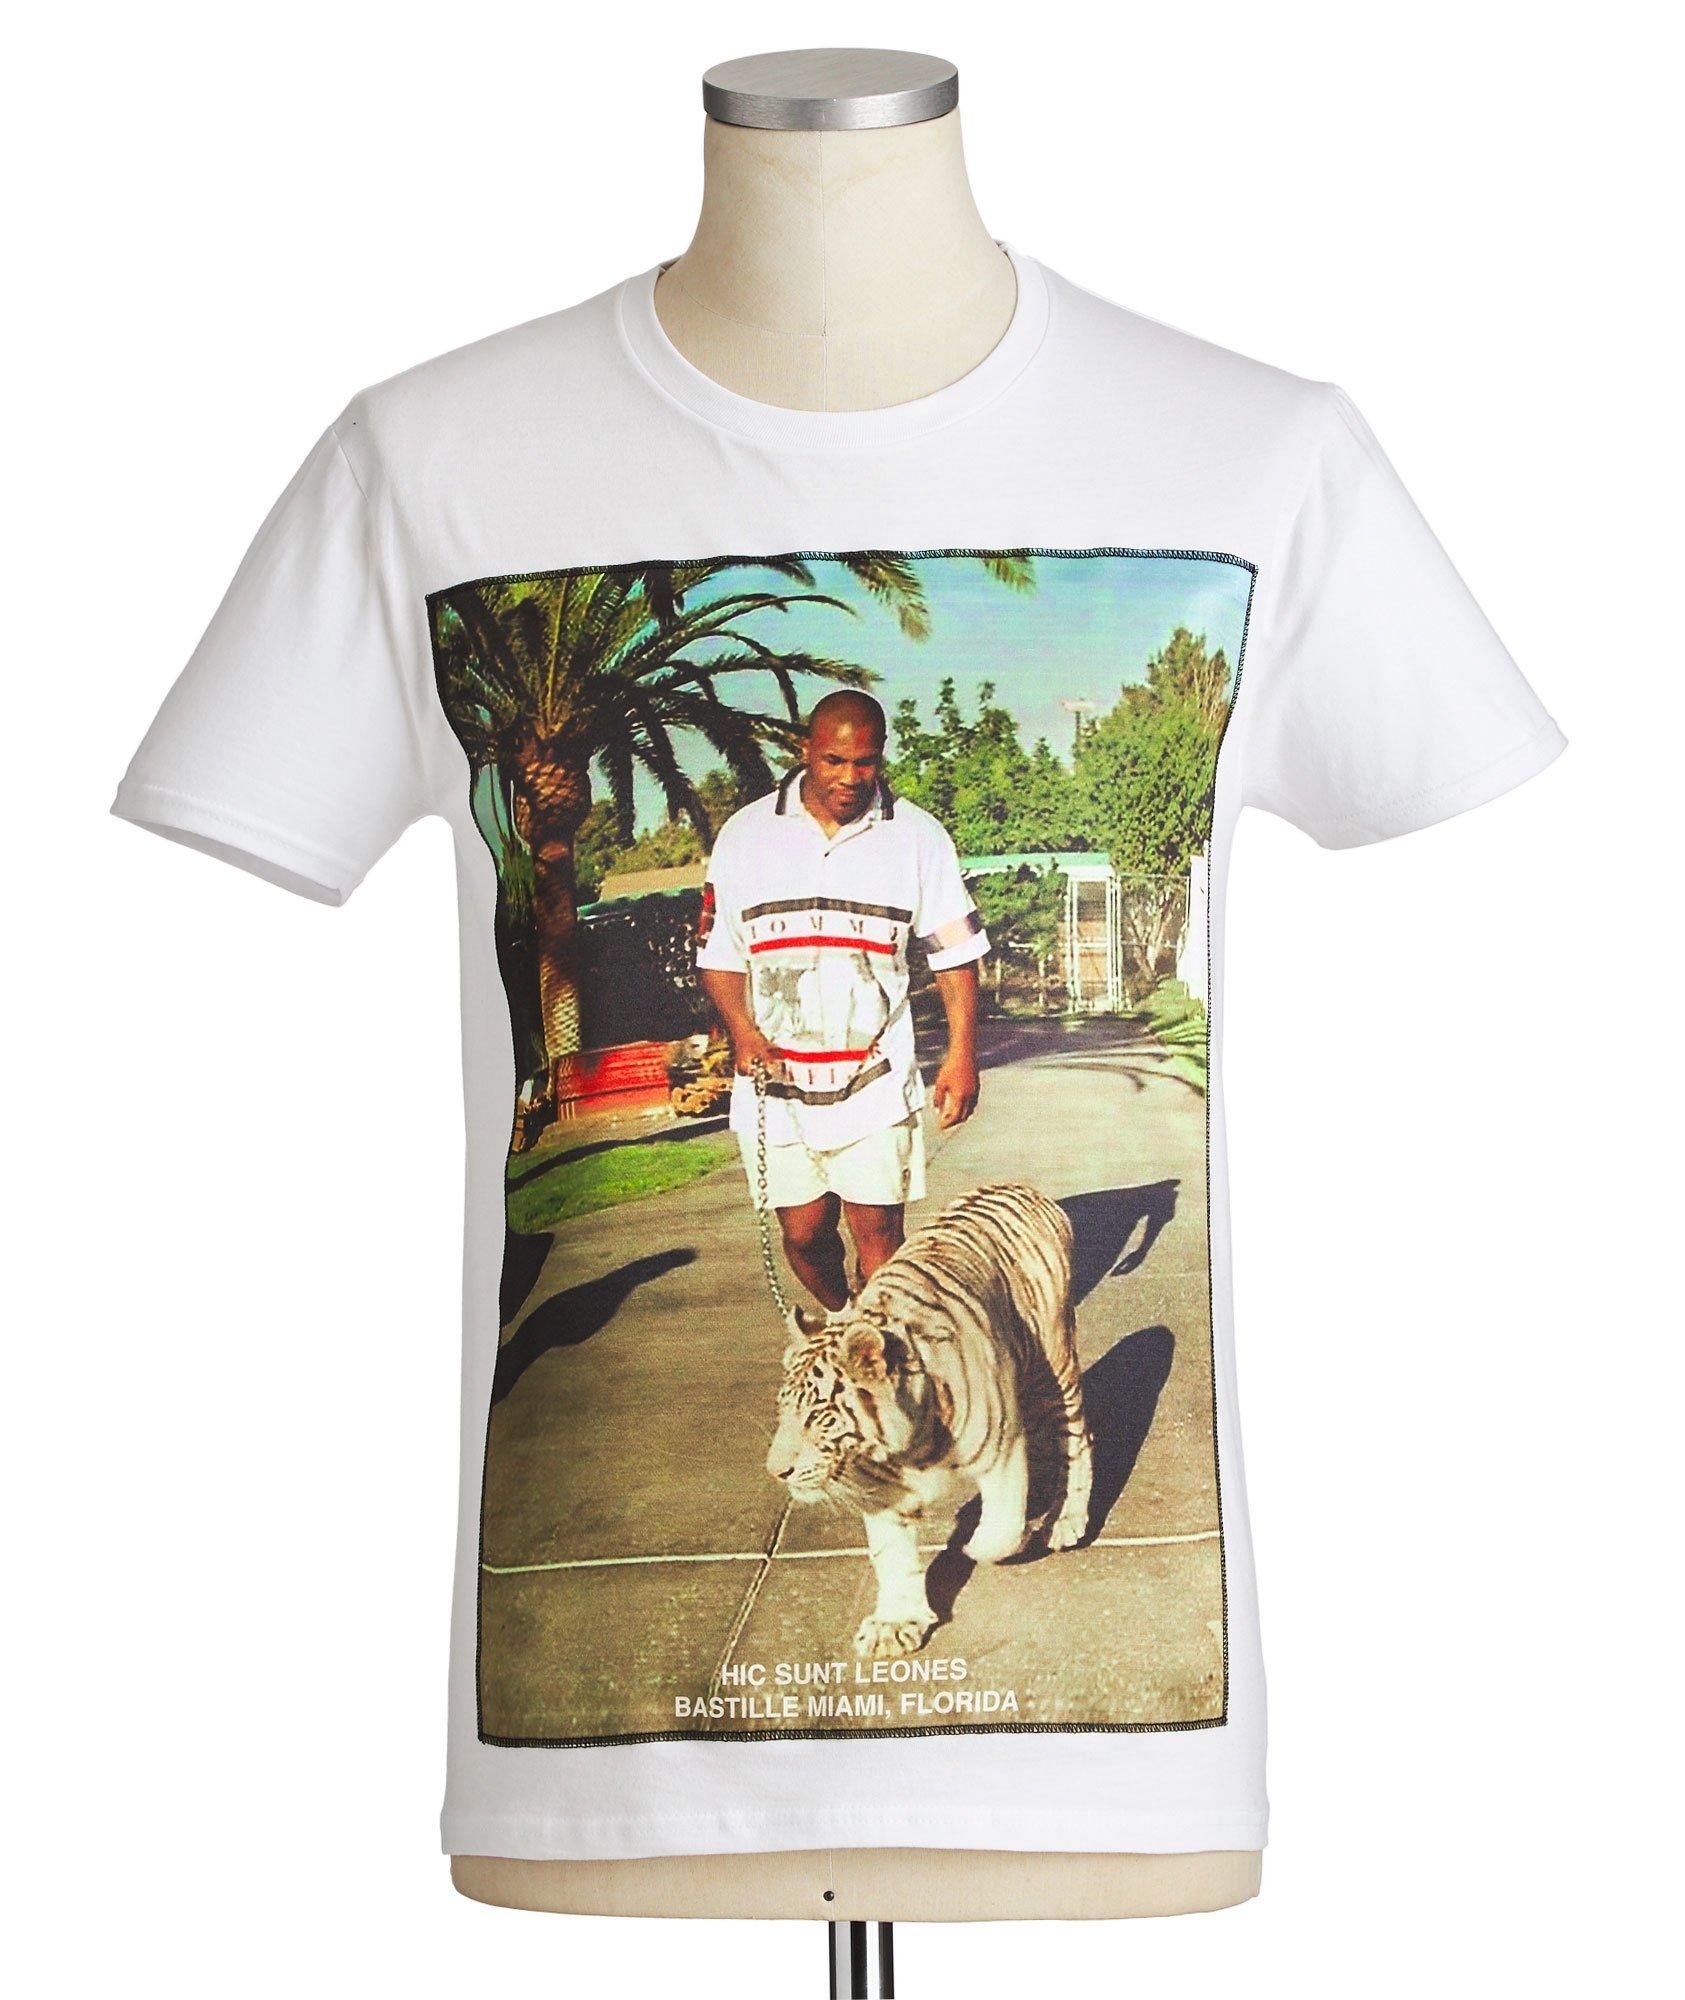 Tyson withTiger Printed Cotton T-Shirt image 0